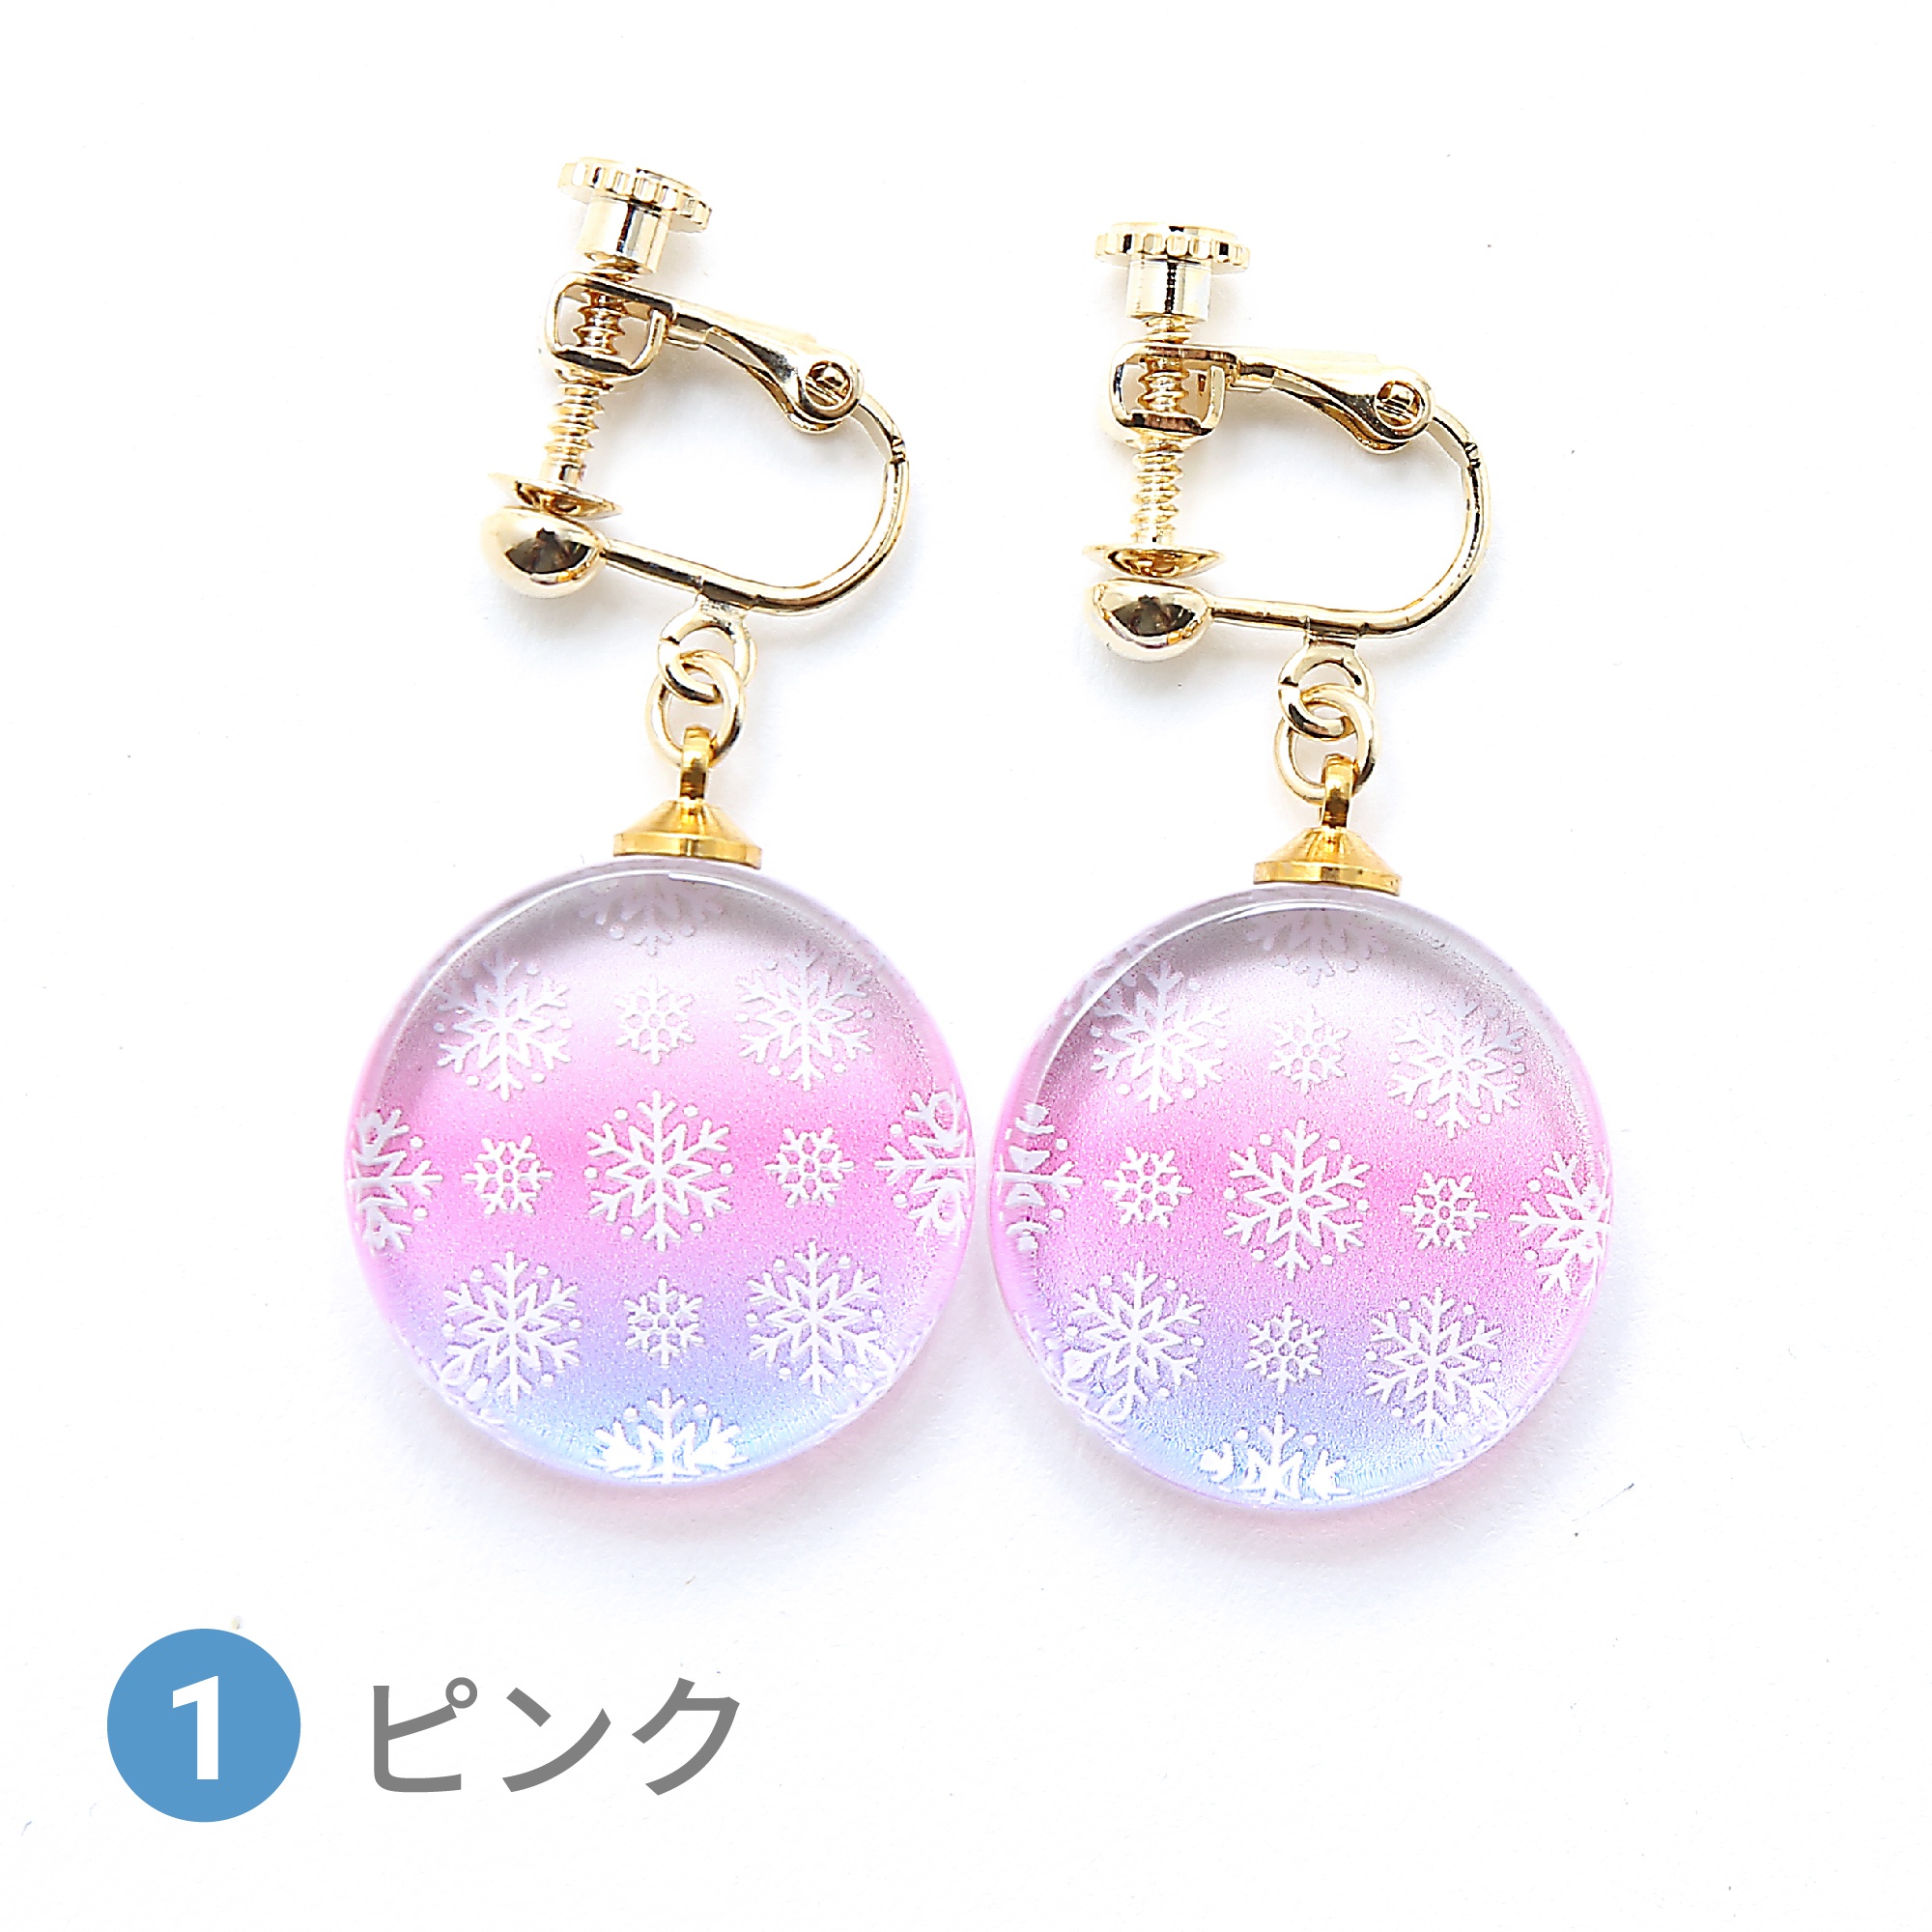 Glass accessories Earring snow flake pink round shape